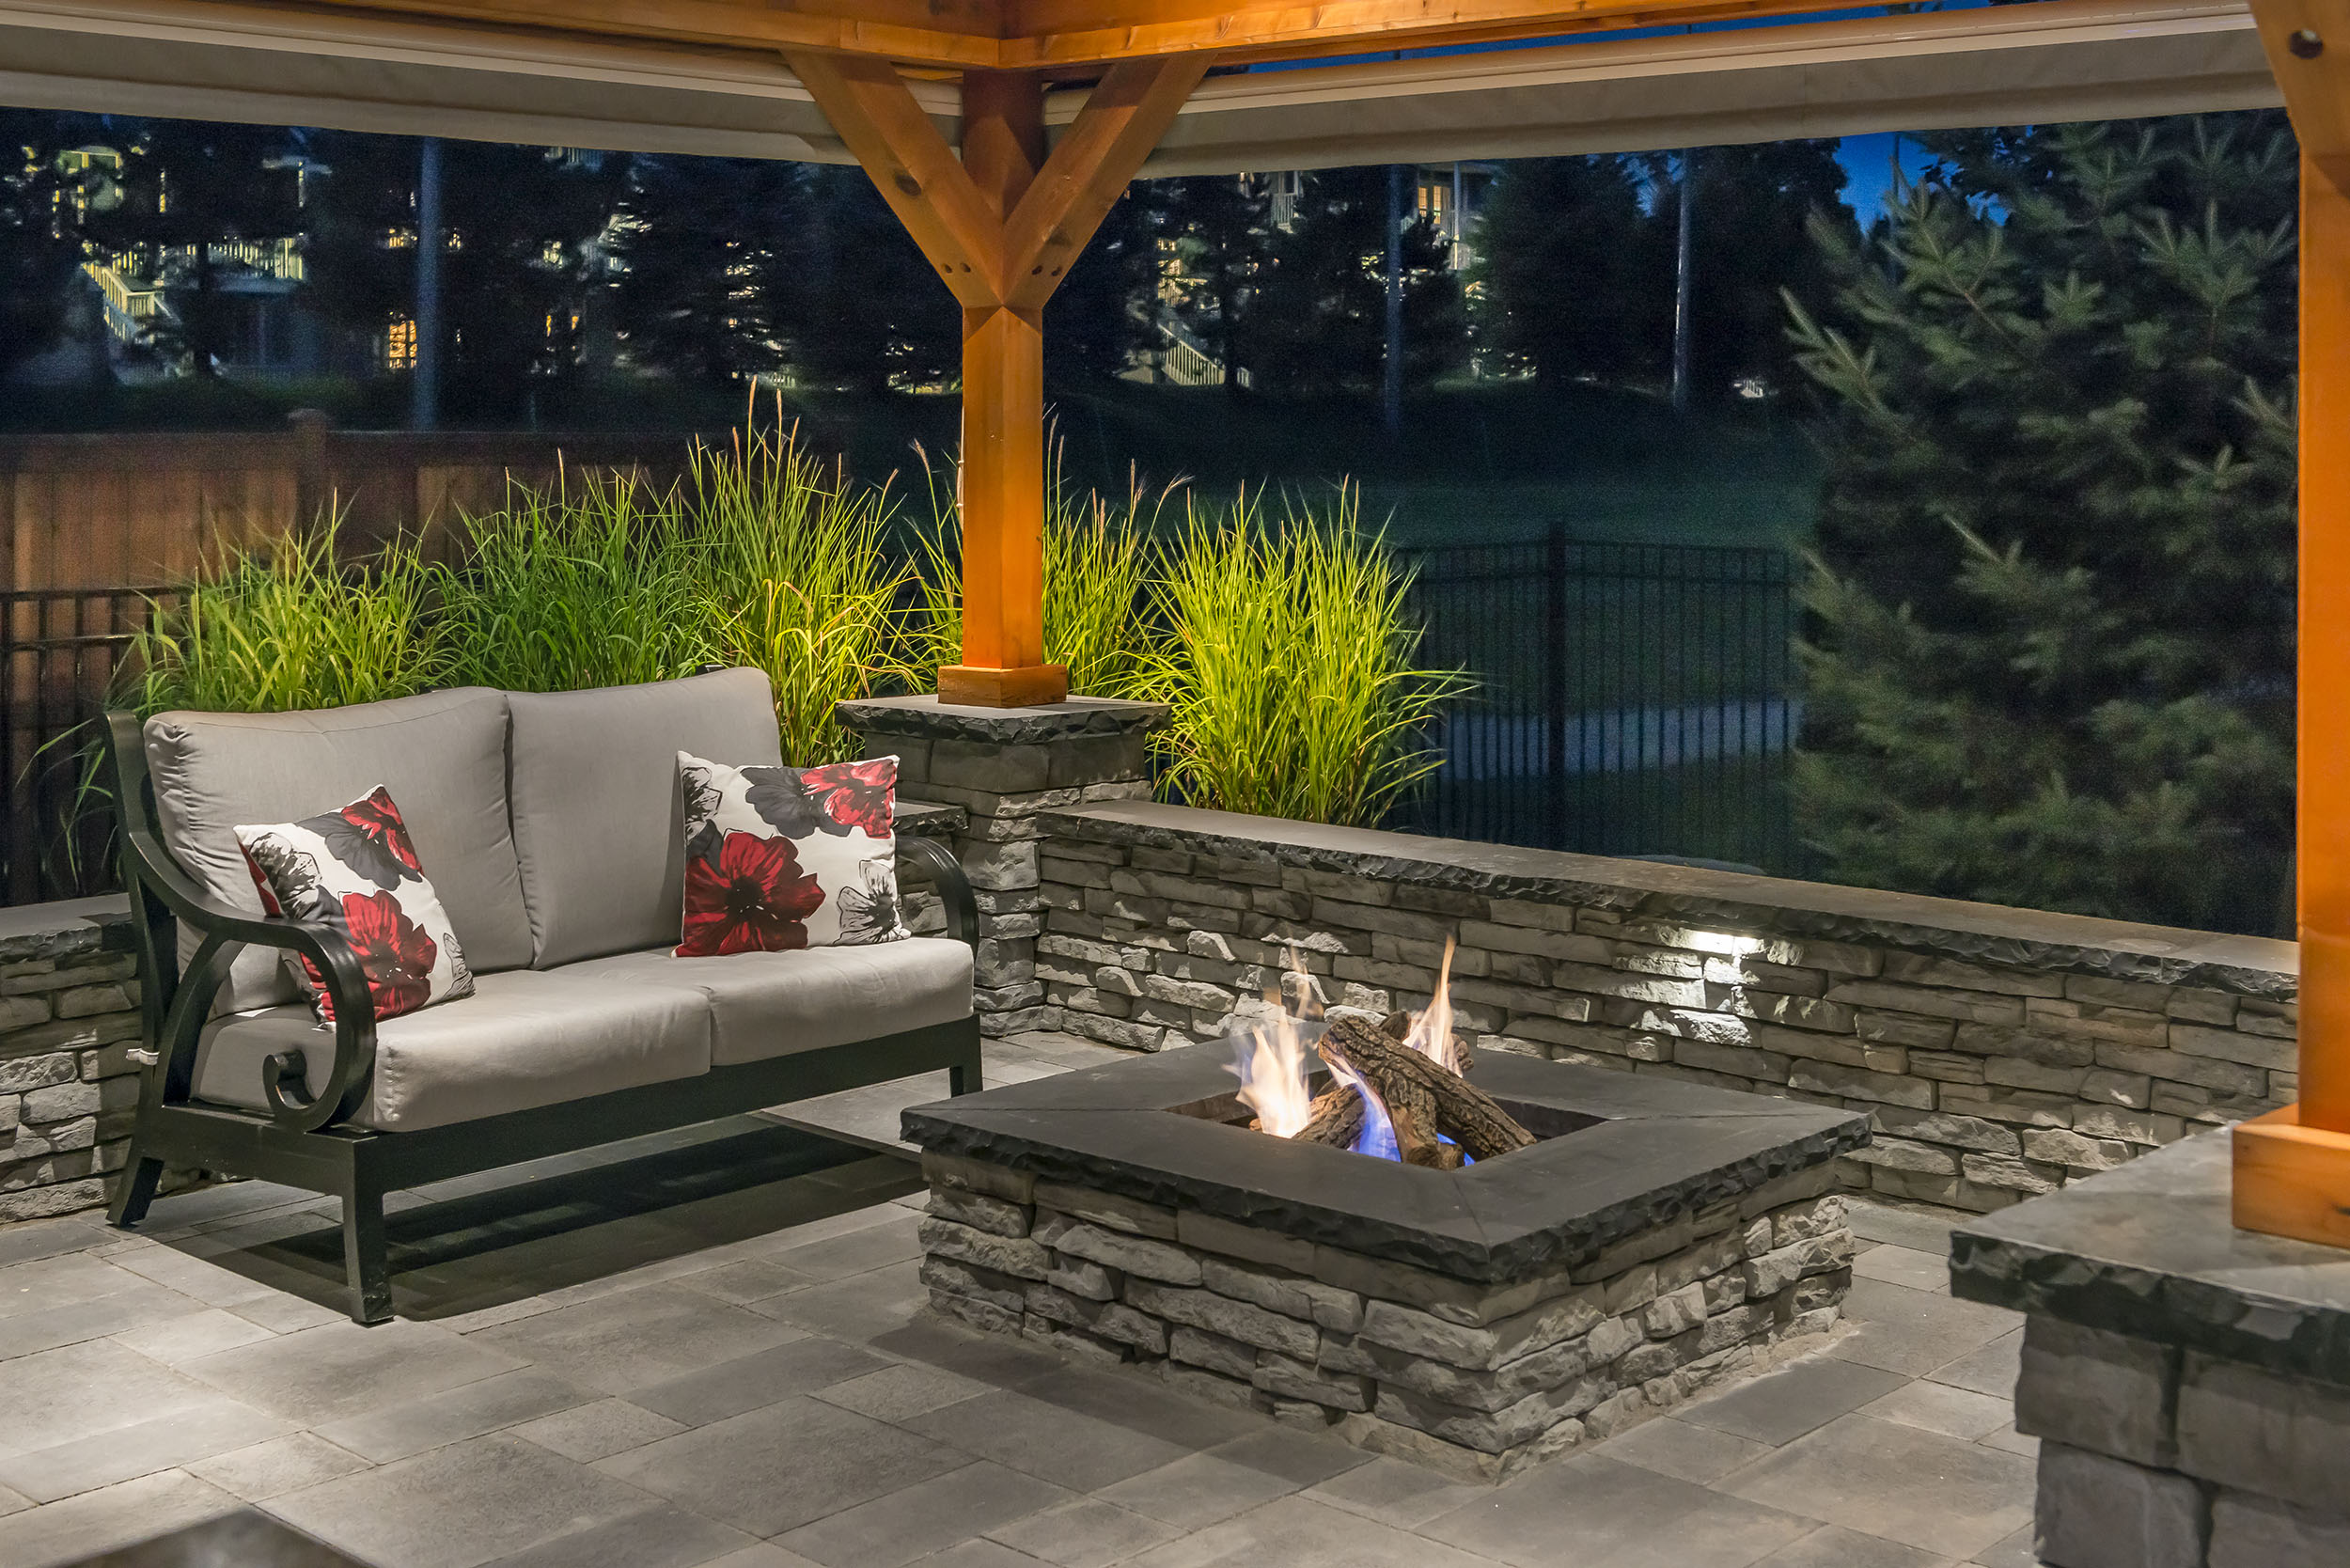 Outdoor living at night with fireplace in York, Harrisburg and Lancaster, PA